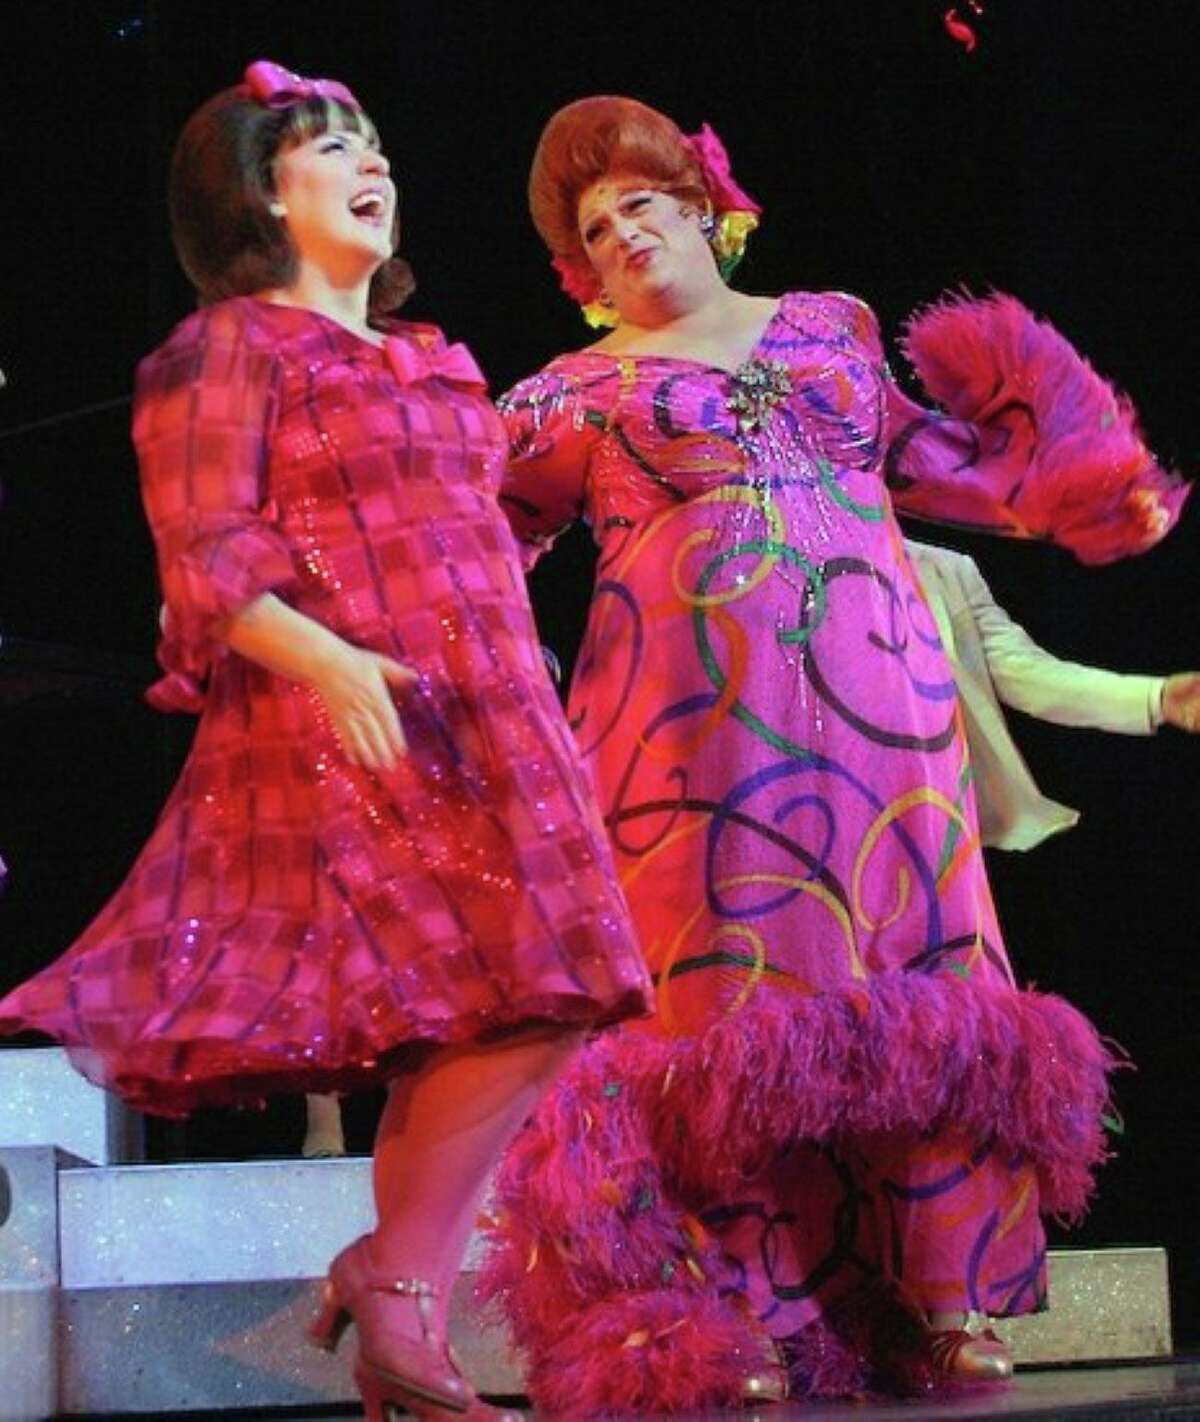 Marissa Follo Perry, of Beacon Falls, appears with Harvey Fierstein during the curtain call for Broadway’s production of “Hairspray.” Two of her Broadway favorites are “Thoroughly Modern Millie” and “The Color Purple.”